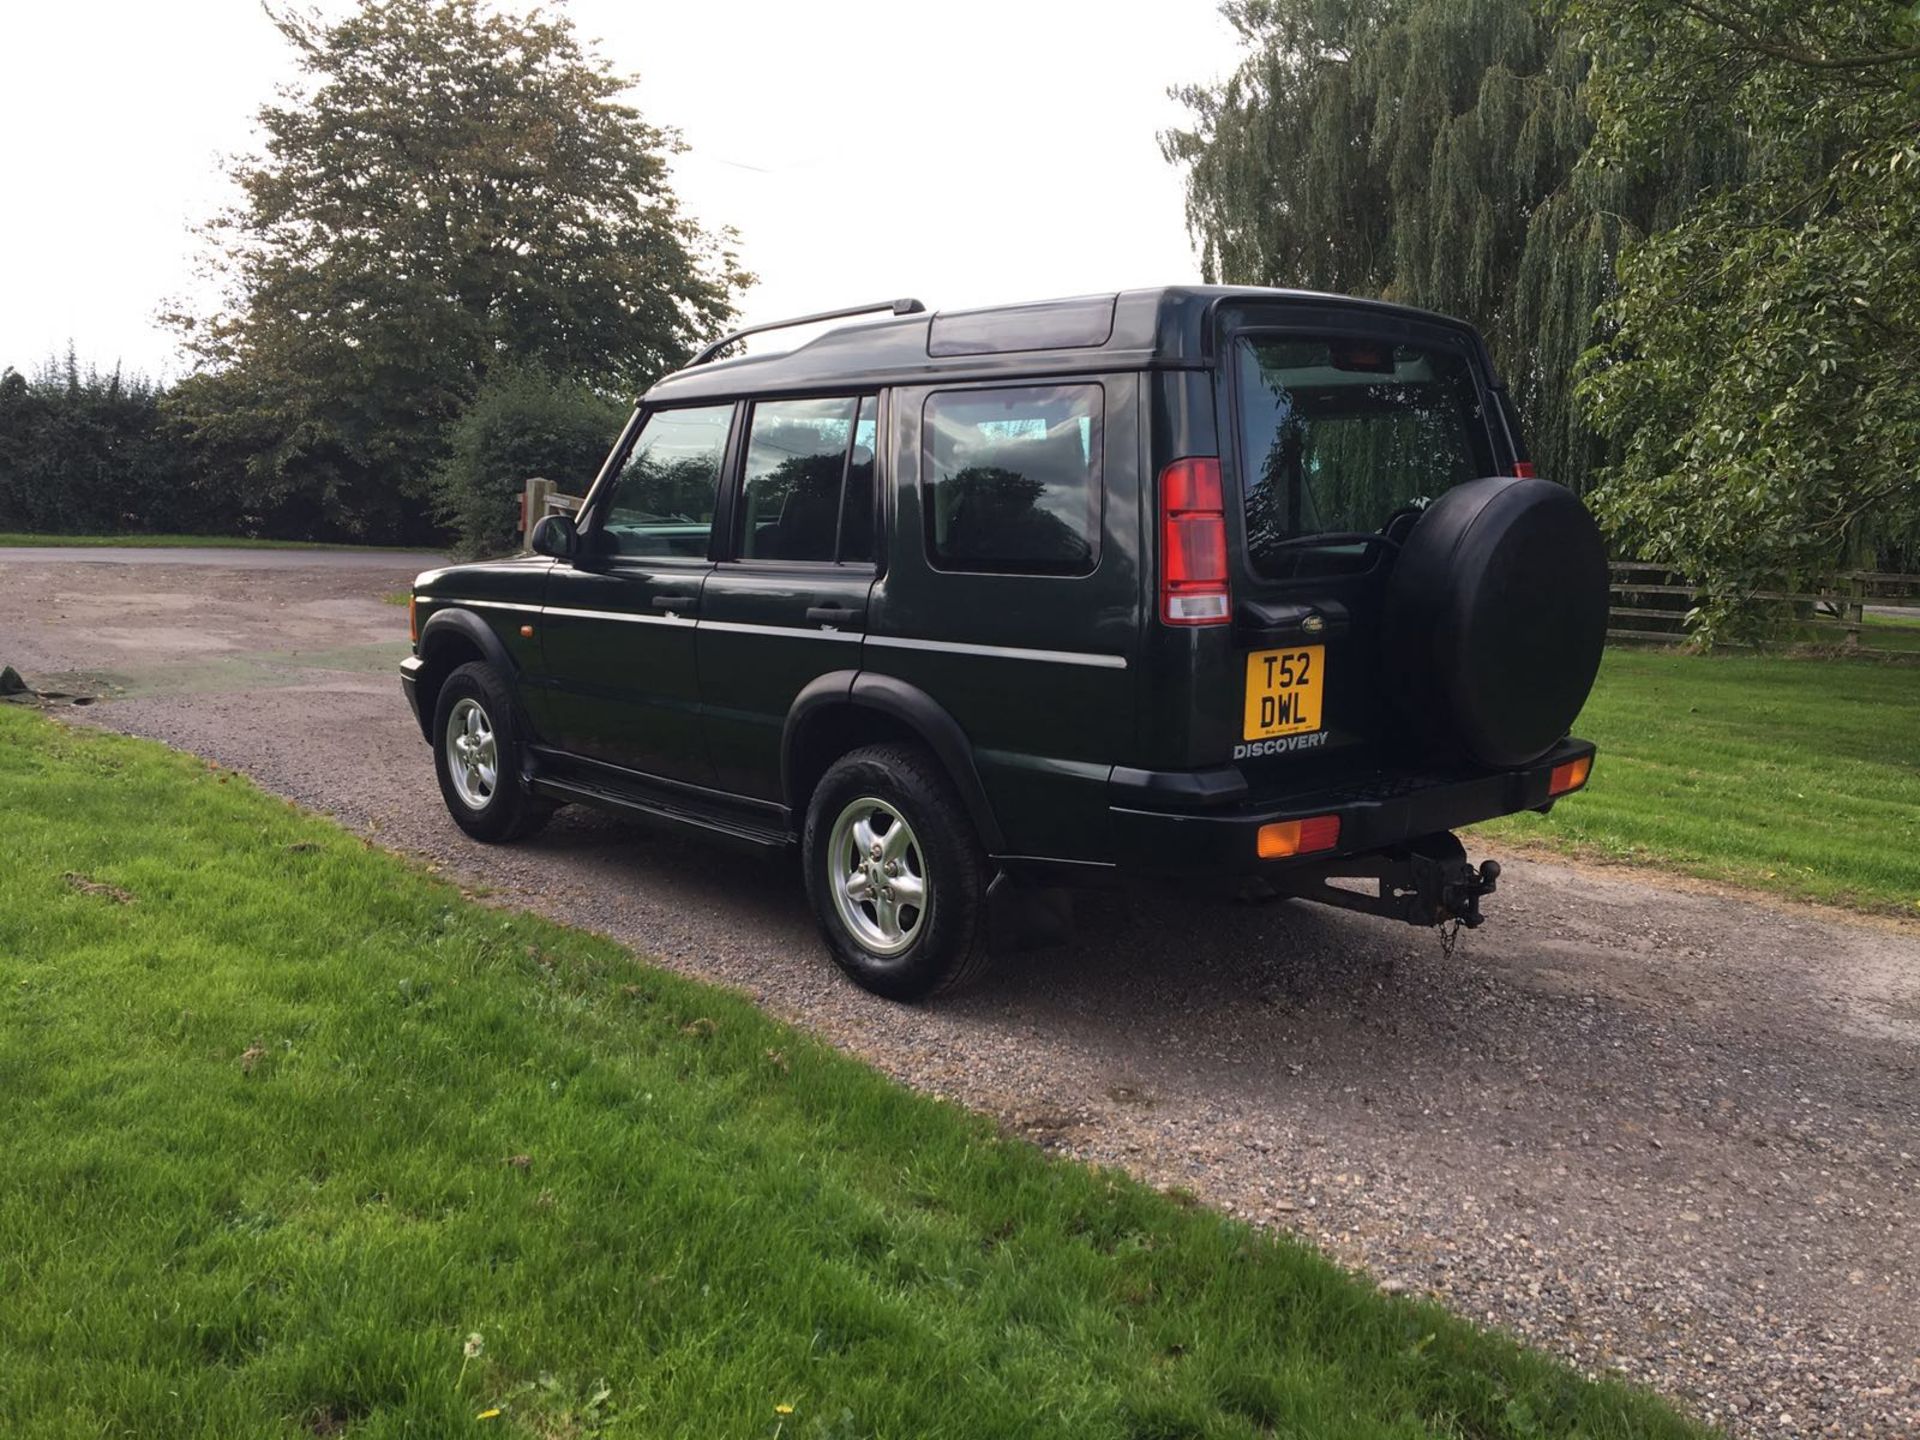 1999 REG LAND ROVER DISCOVERY GREEN, NEW ENGINE FITTED NOT LONG AGO AND COMES WITH NEW MOT *NO VAT* - Image 4 of 10